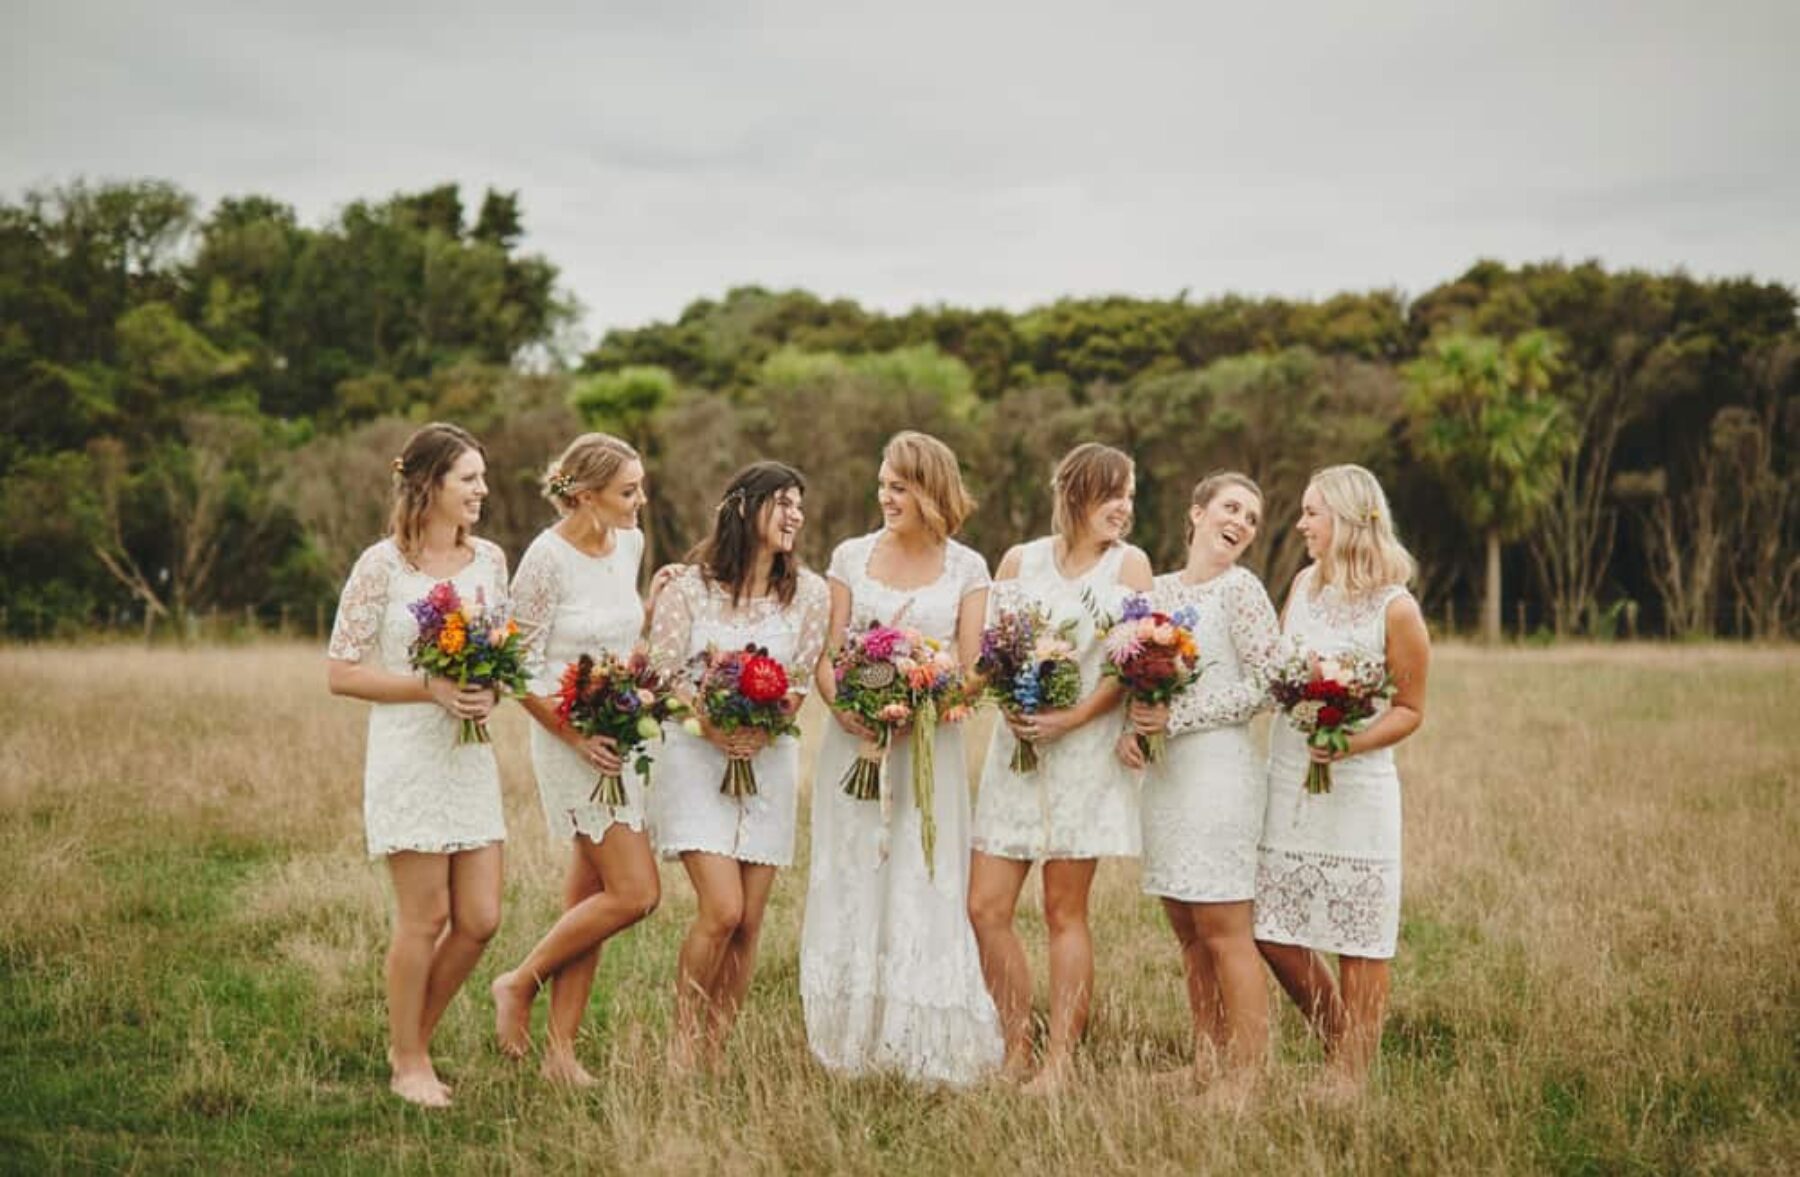 Bridesmaids in white with vibrant bouquets